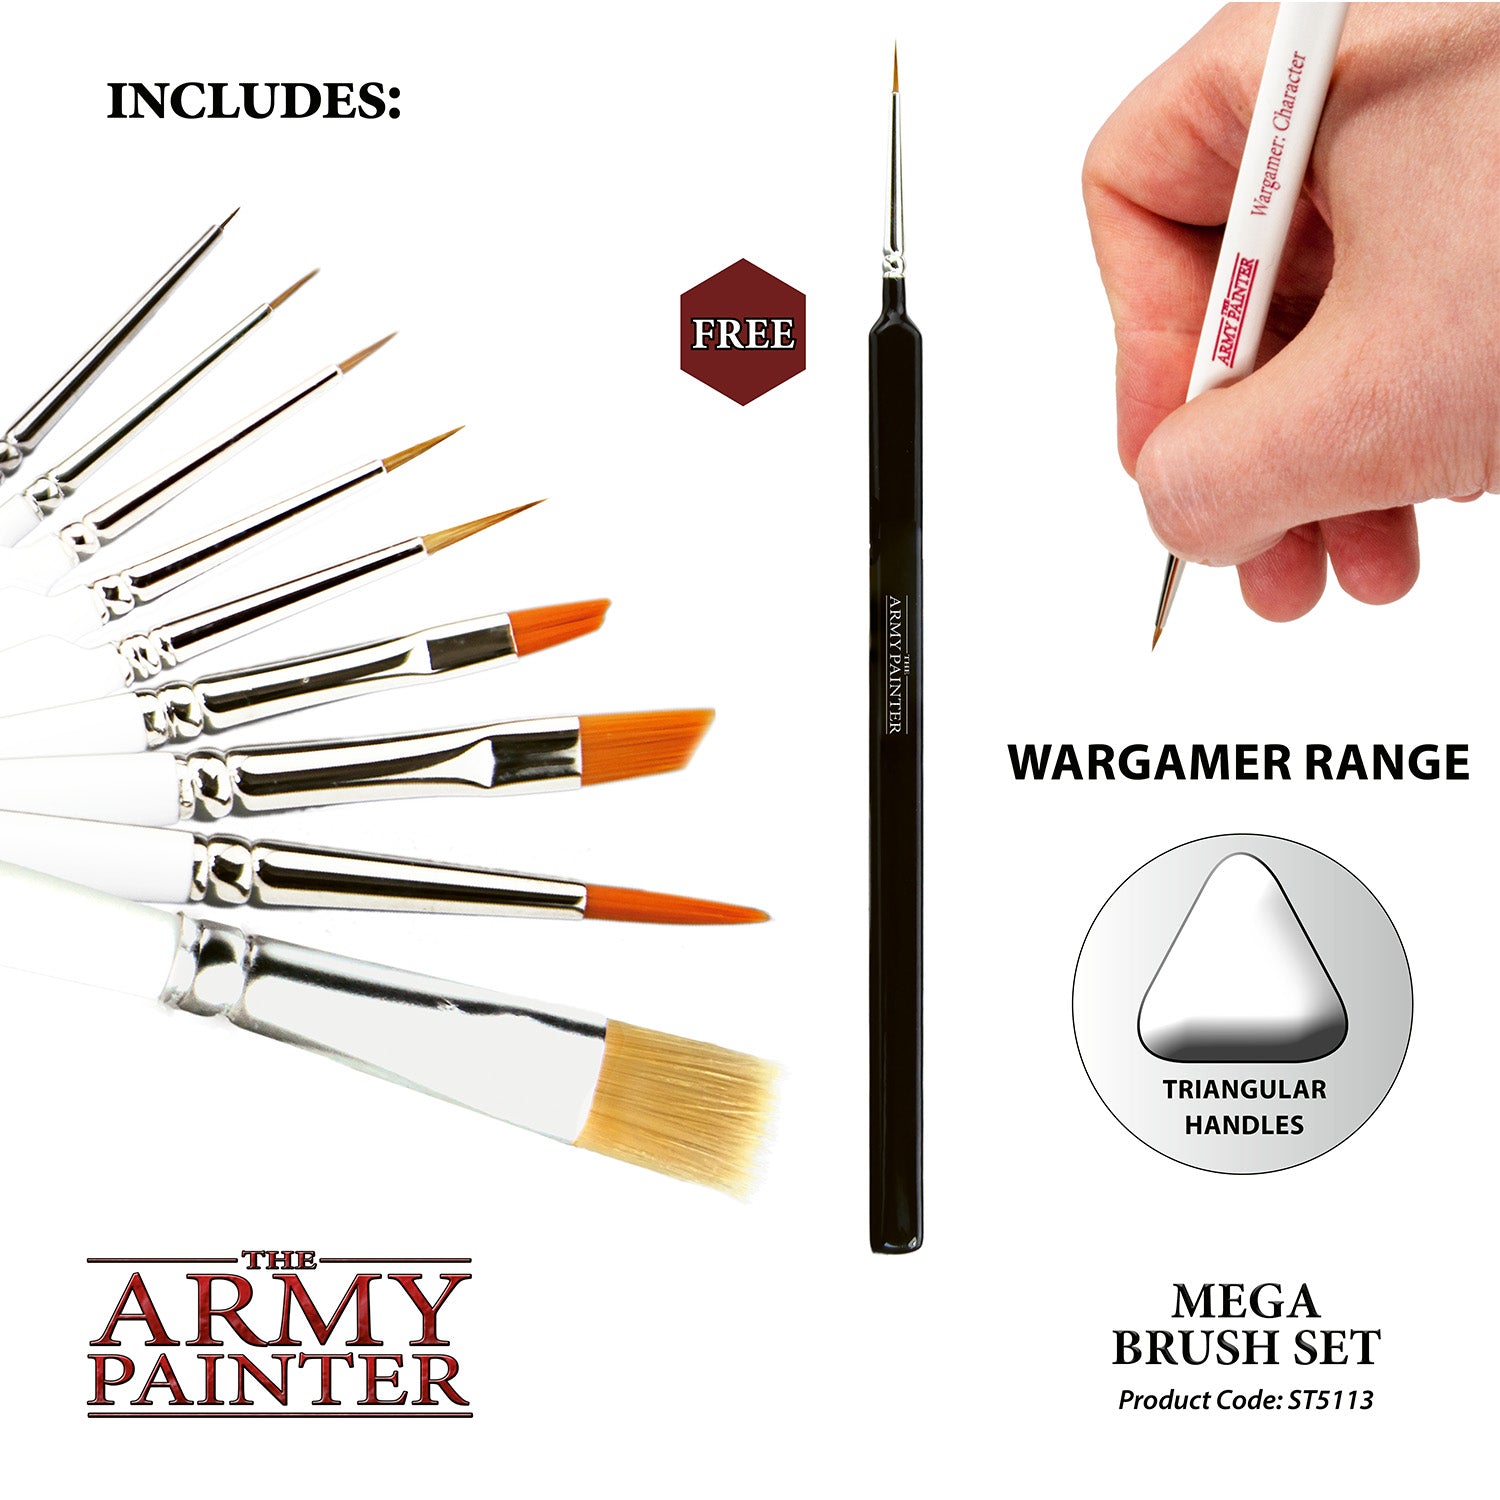 The Army Painter Miniature Paint Sets, Model Paint Set, 18 Acrylic Paints  Kit with 2 Hobby Paint Brushes and More